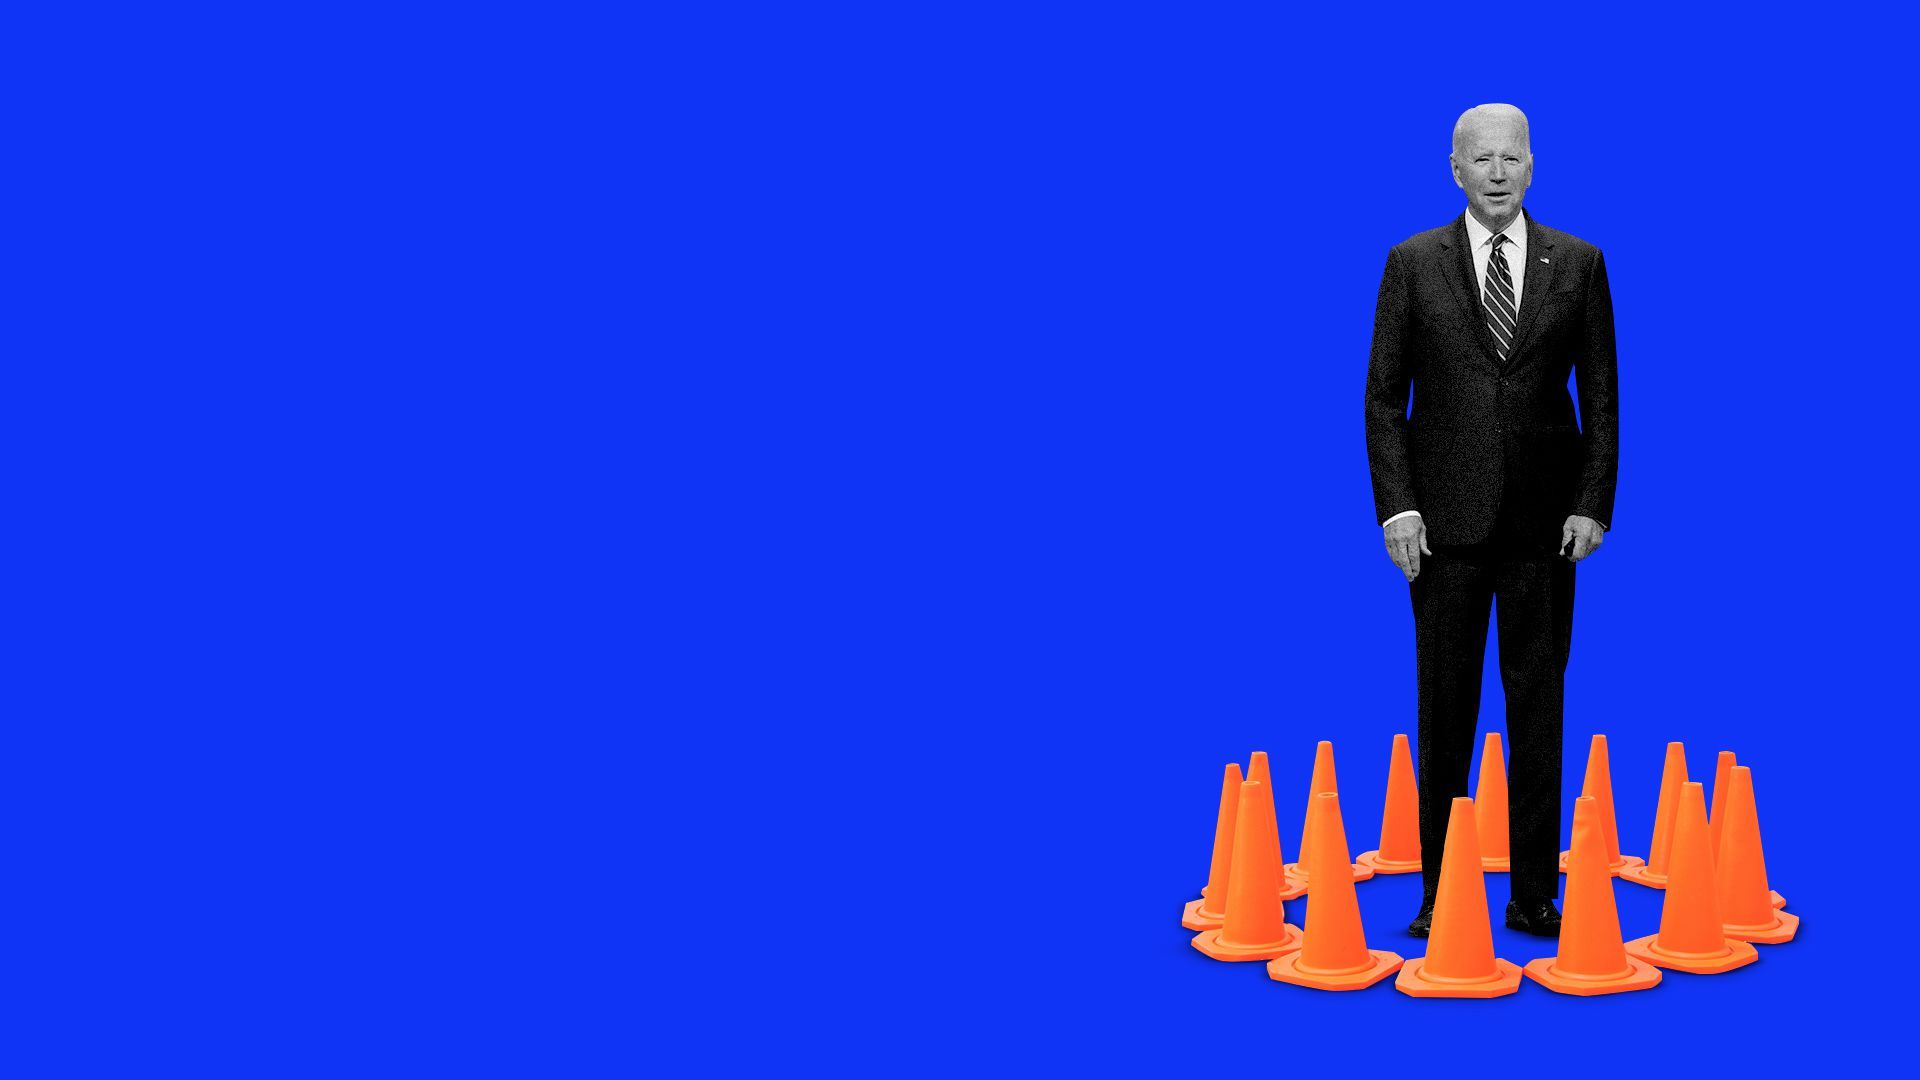 Photo illustration of Joe Biden surrounded by traffic cones. 